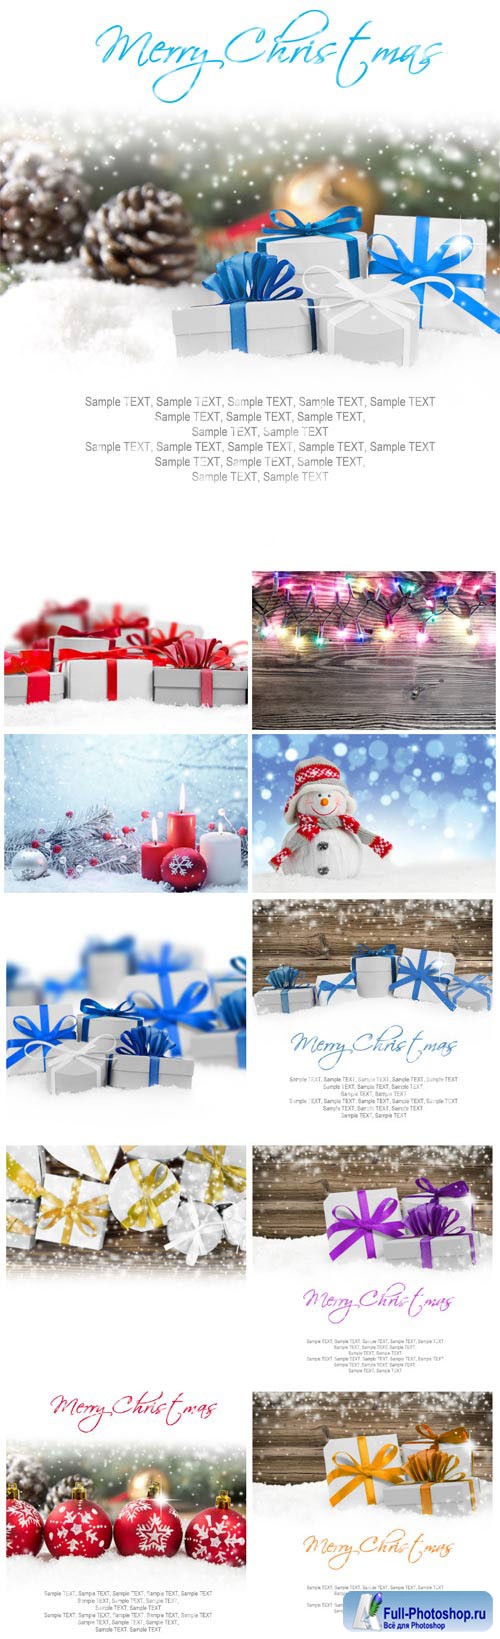 New Year and Christmas stock photos 18